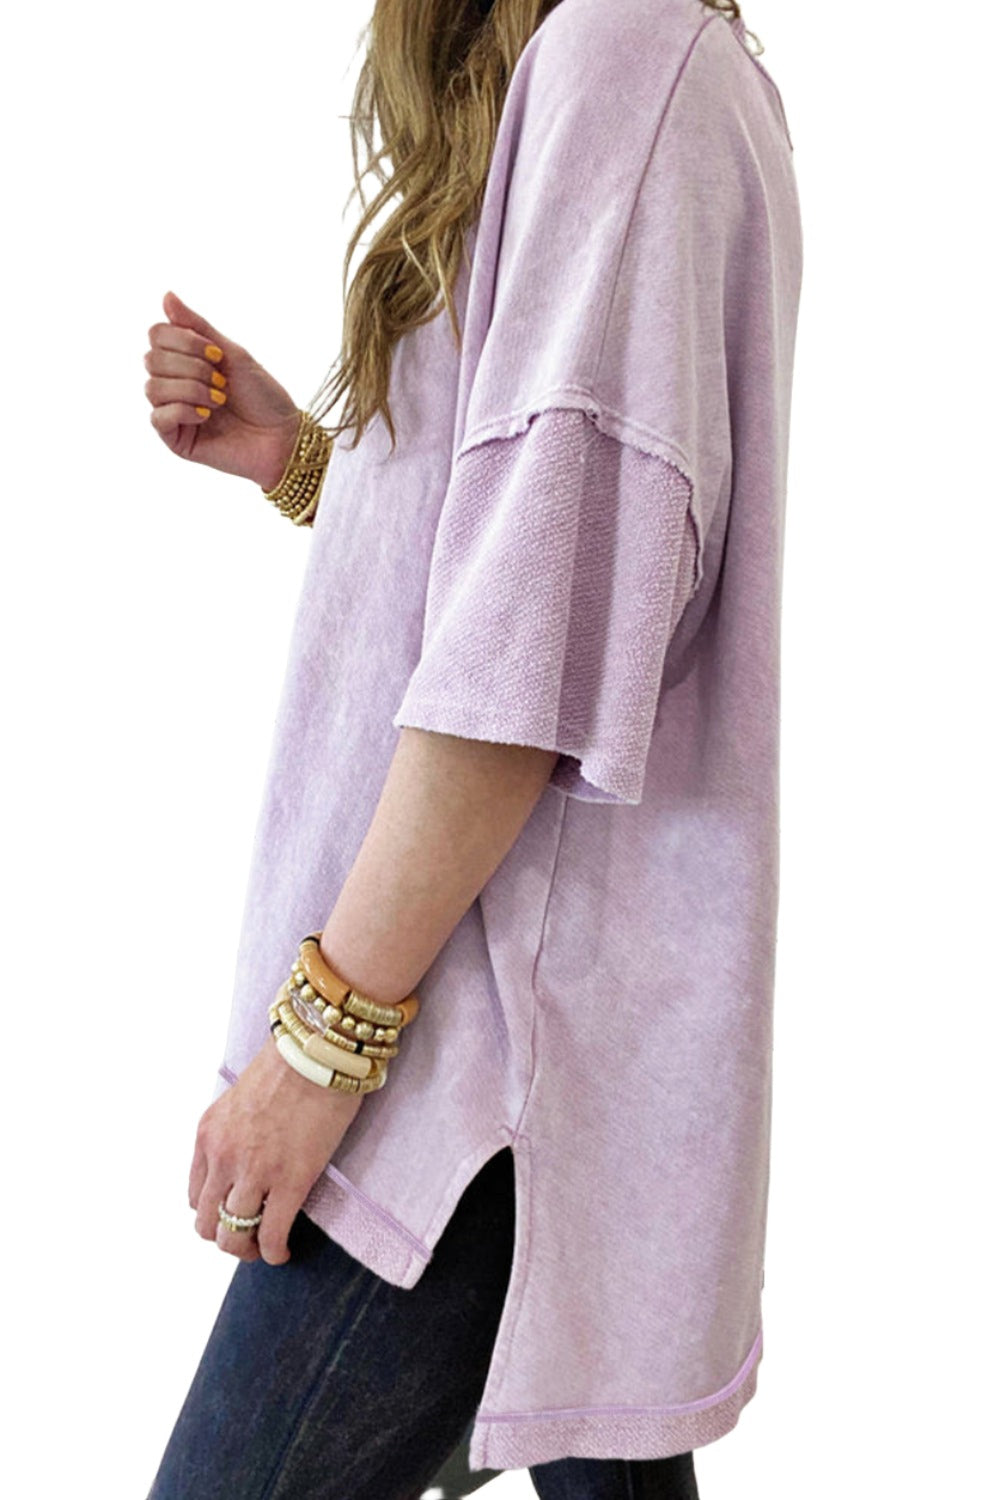 Orchid Petal Mineral Wash Exposed Seam Drop Shoulder Oversized Tee